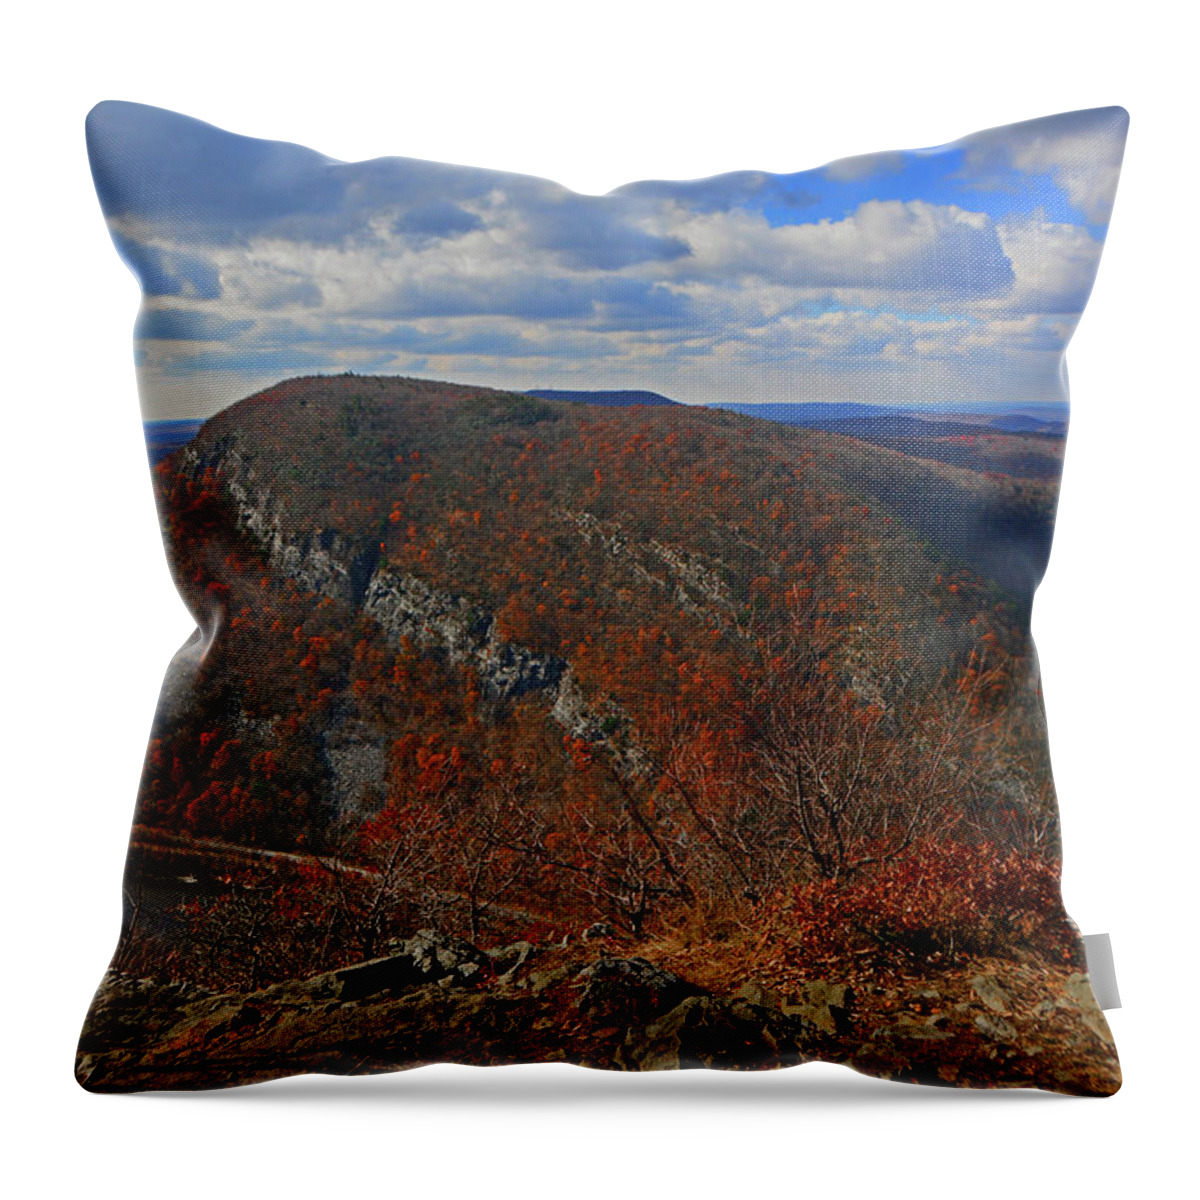 Mount Minsi And The Delaware River From Mount Tammany Throw Pillow featuring the photograph Mount Minsi and the Delaware River from Mount Tammany by Raymond Salani III